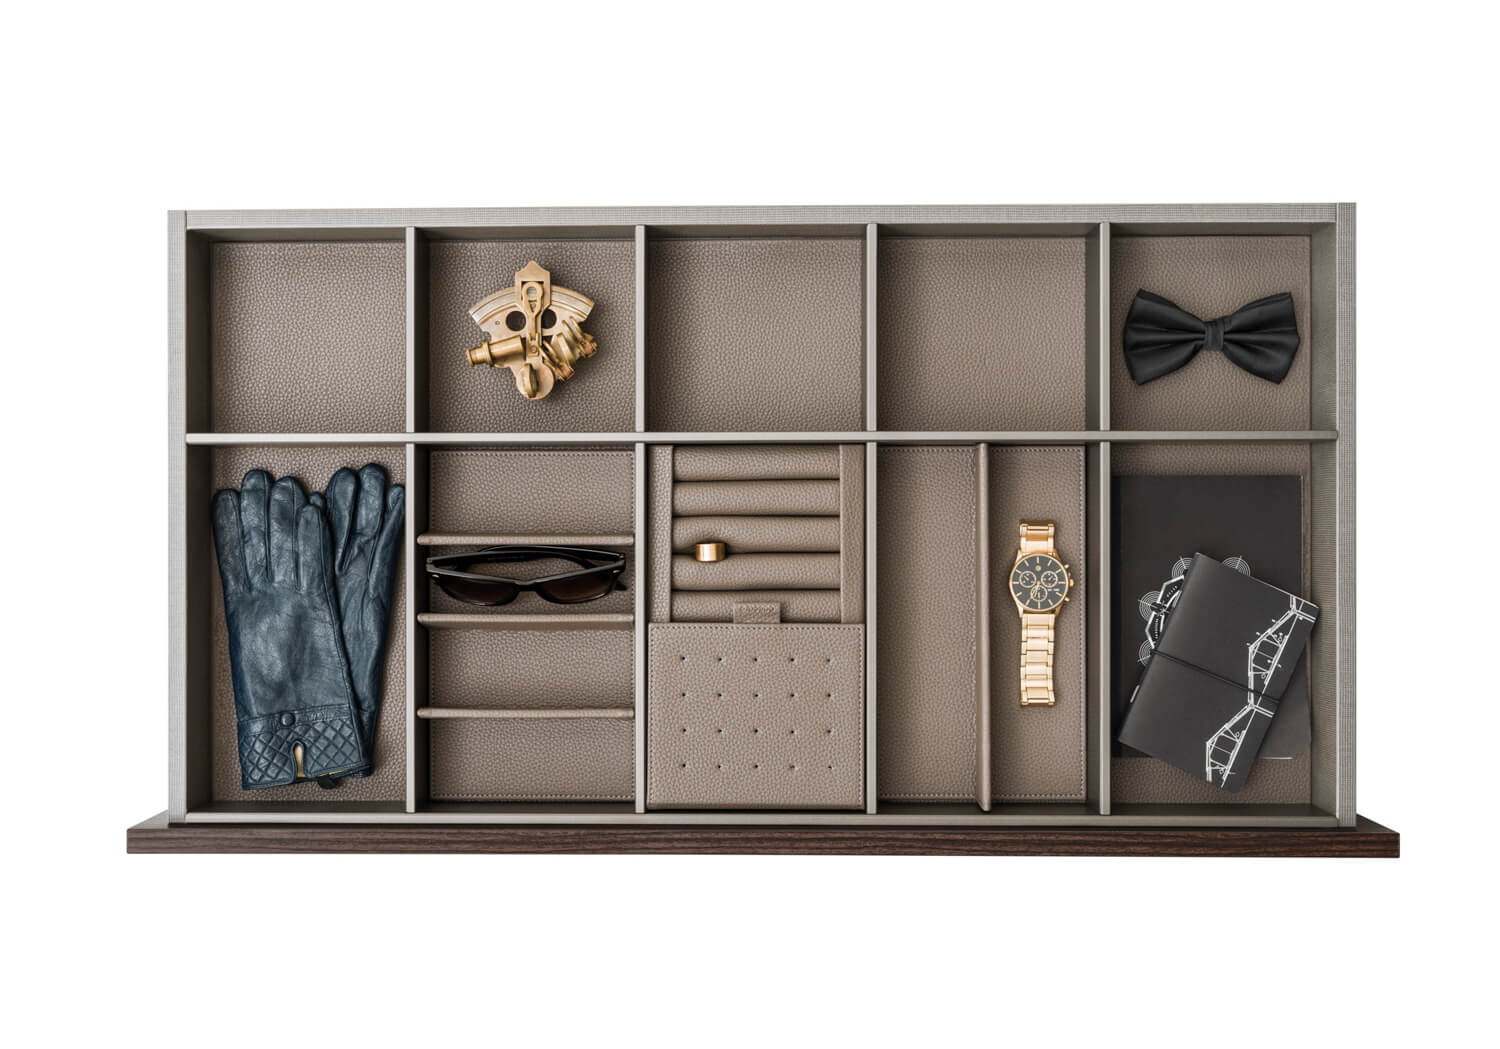 The drawers are customizable with inserts for jewelry, ties, and other fashion accessories.